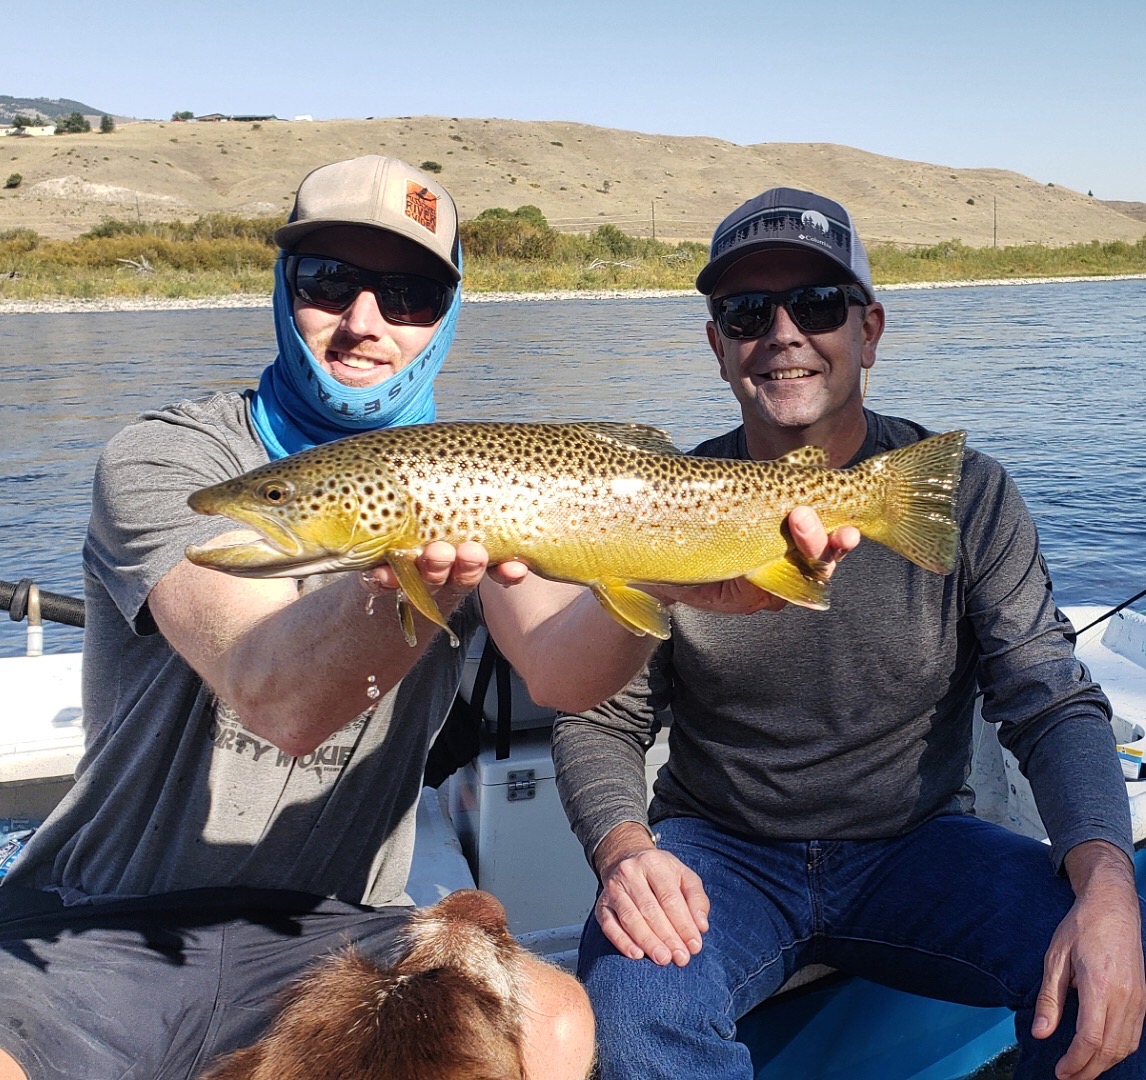 Montana fly fishing guide Paul Bloch with angler